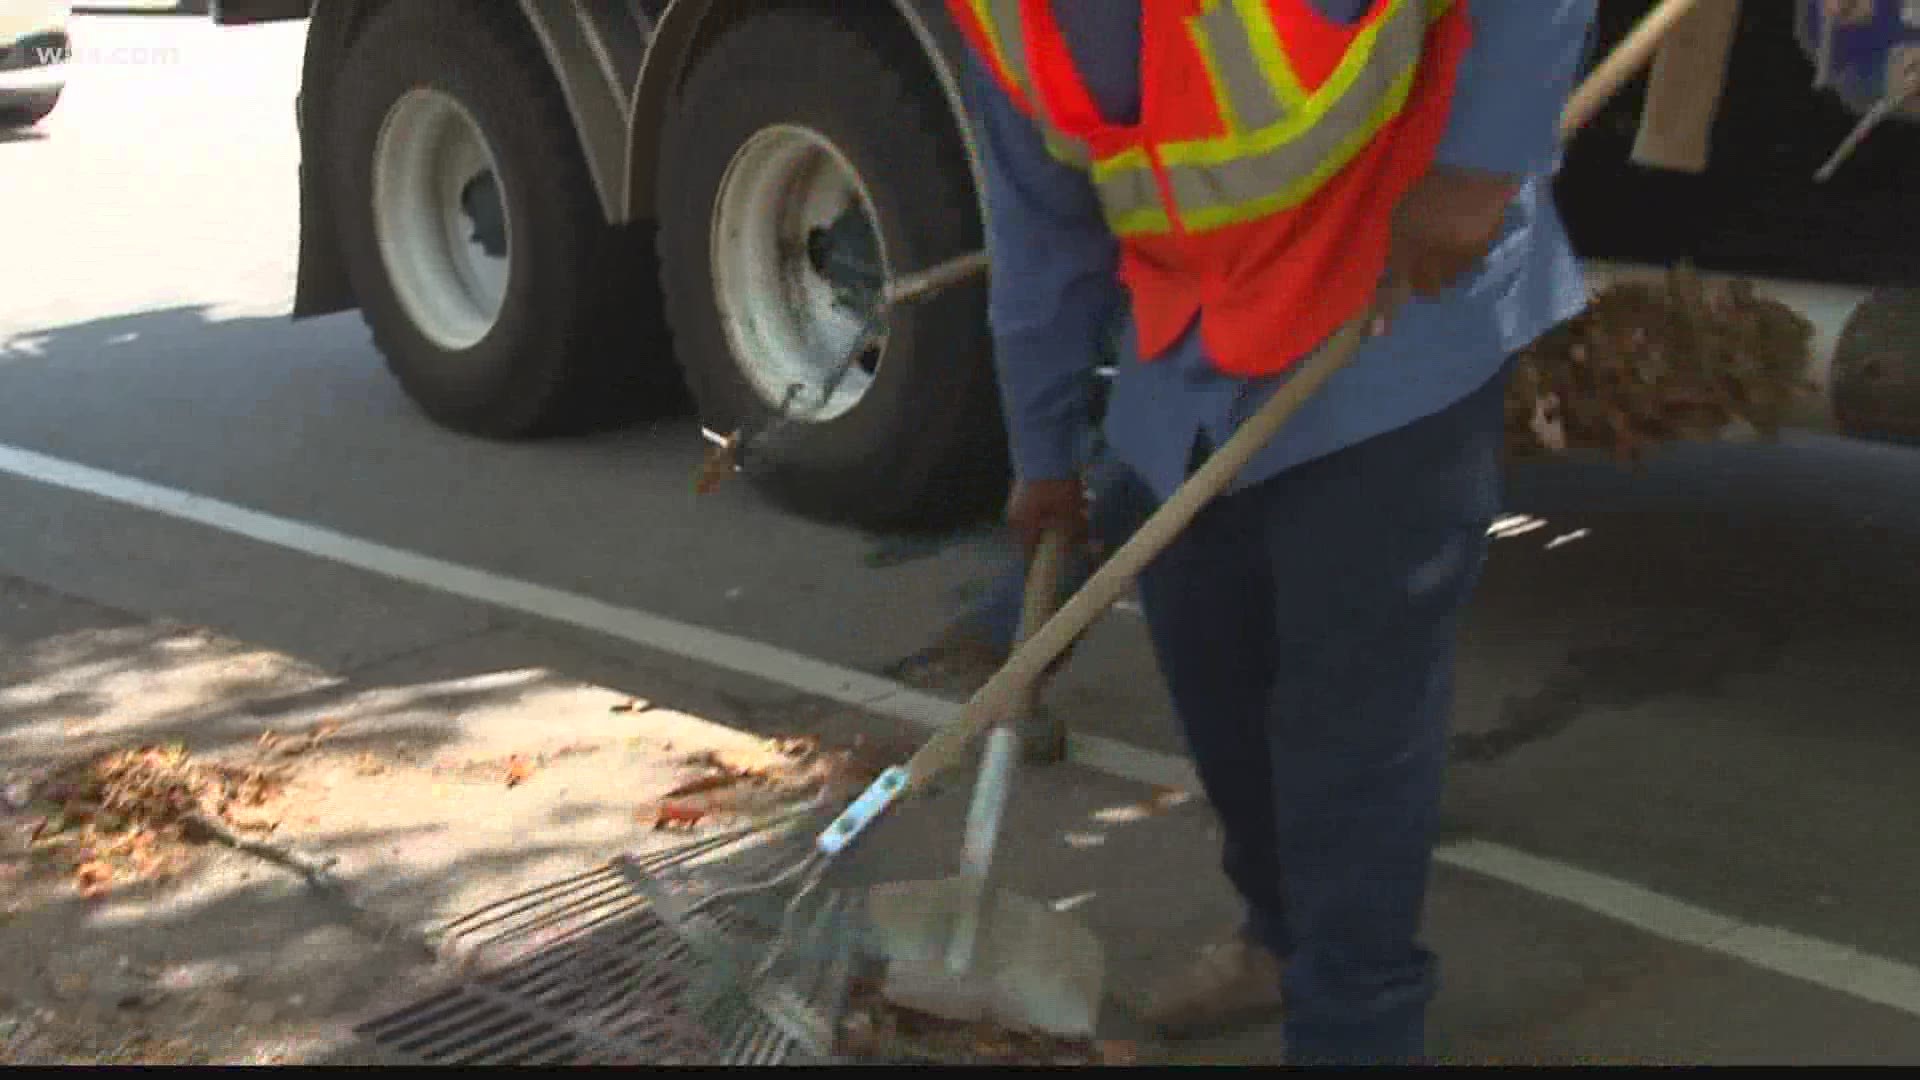 City workers are preparing for heavy rain from remnants of Hurricane Sally.